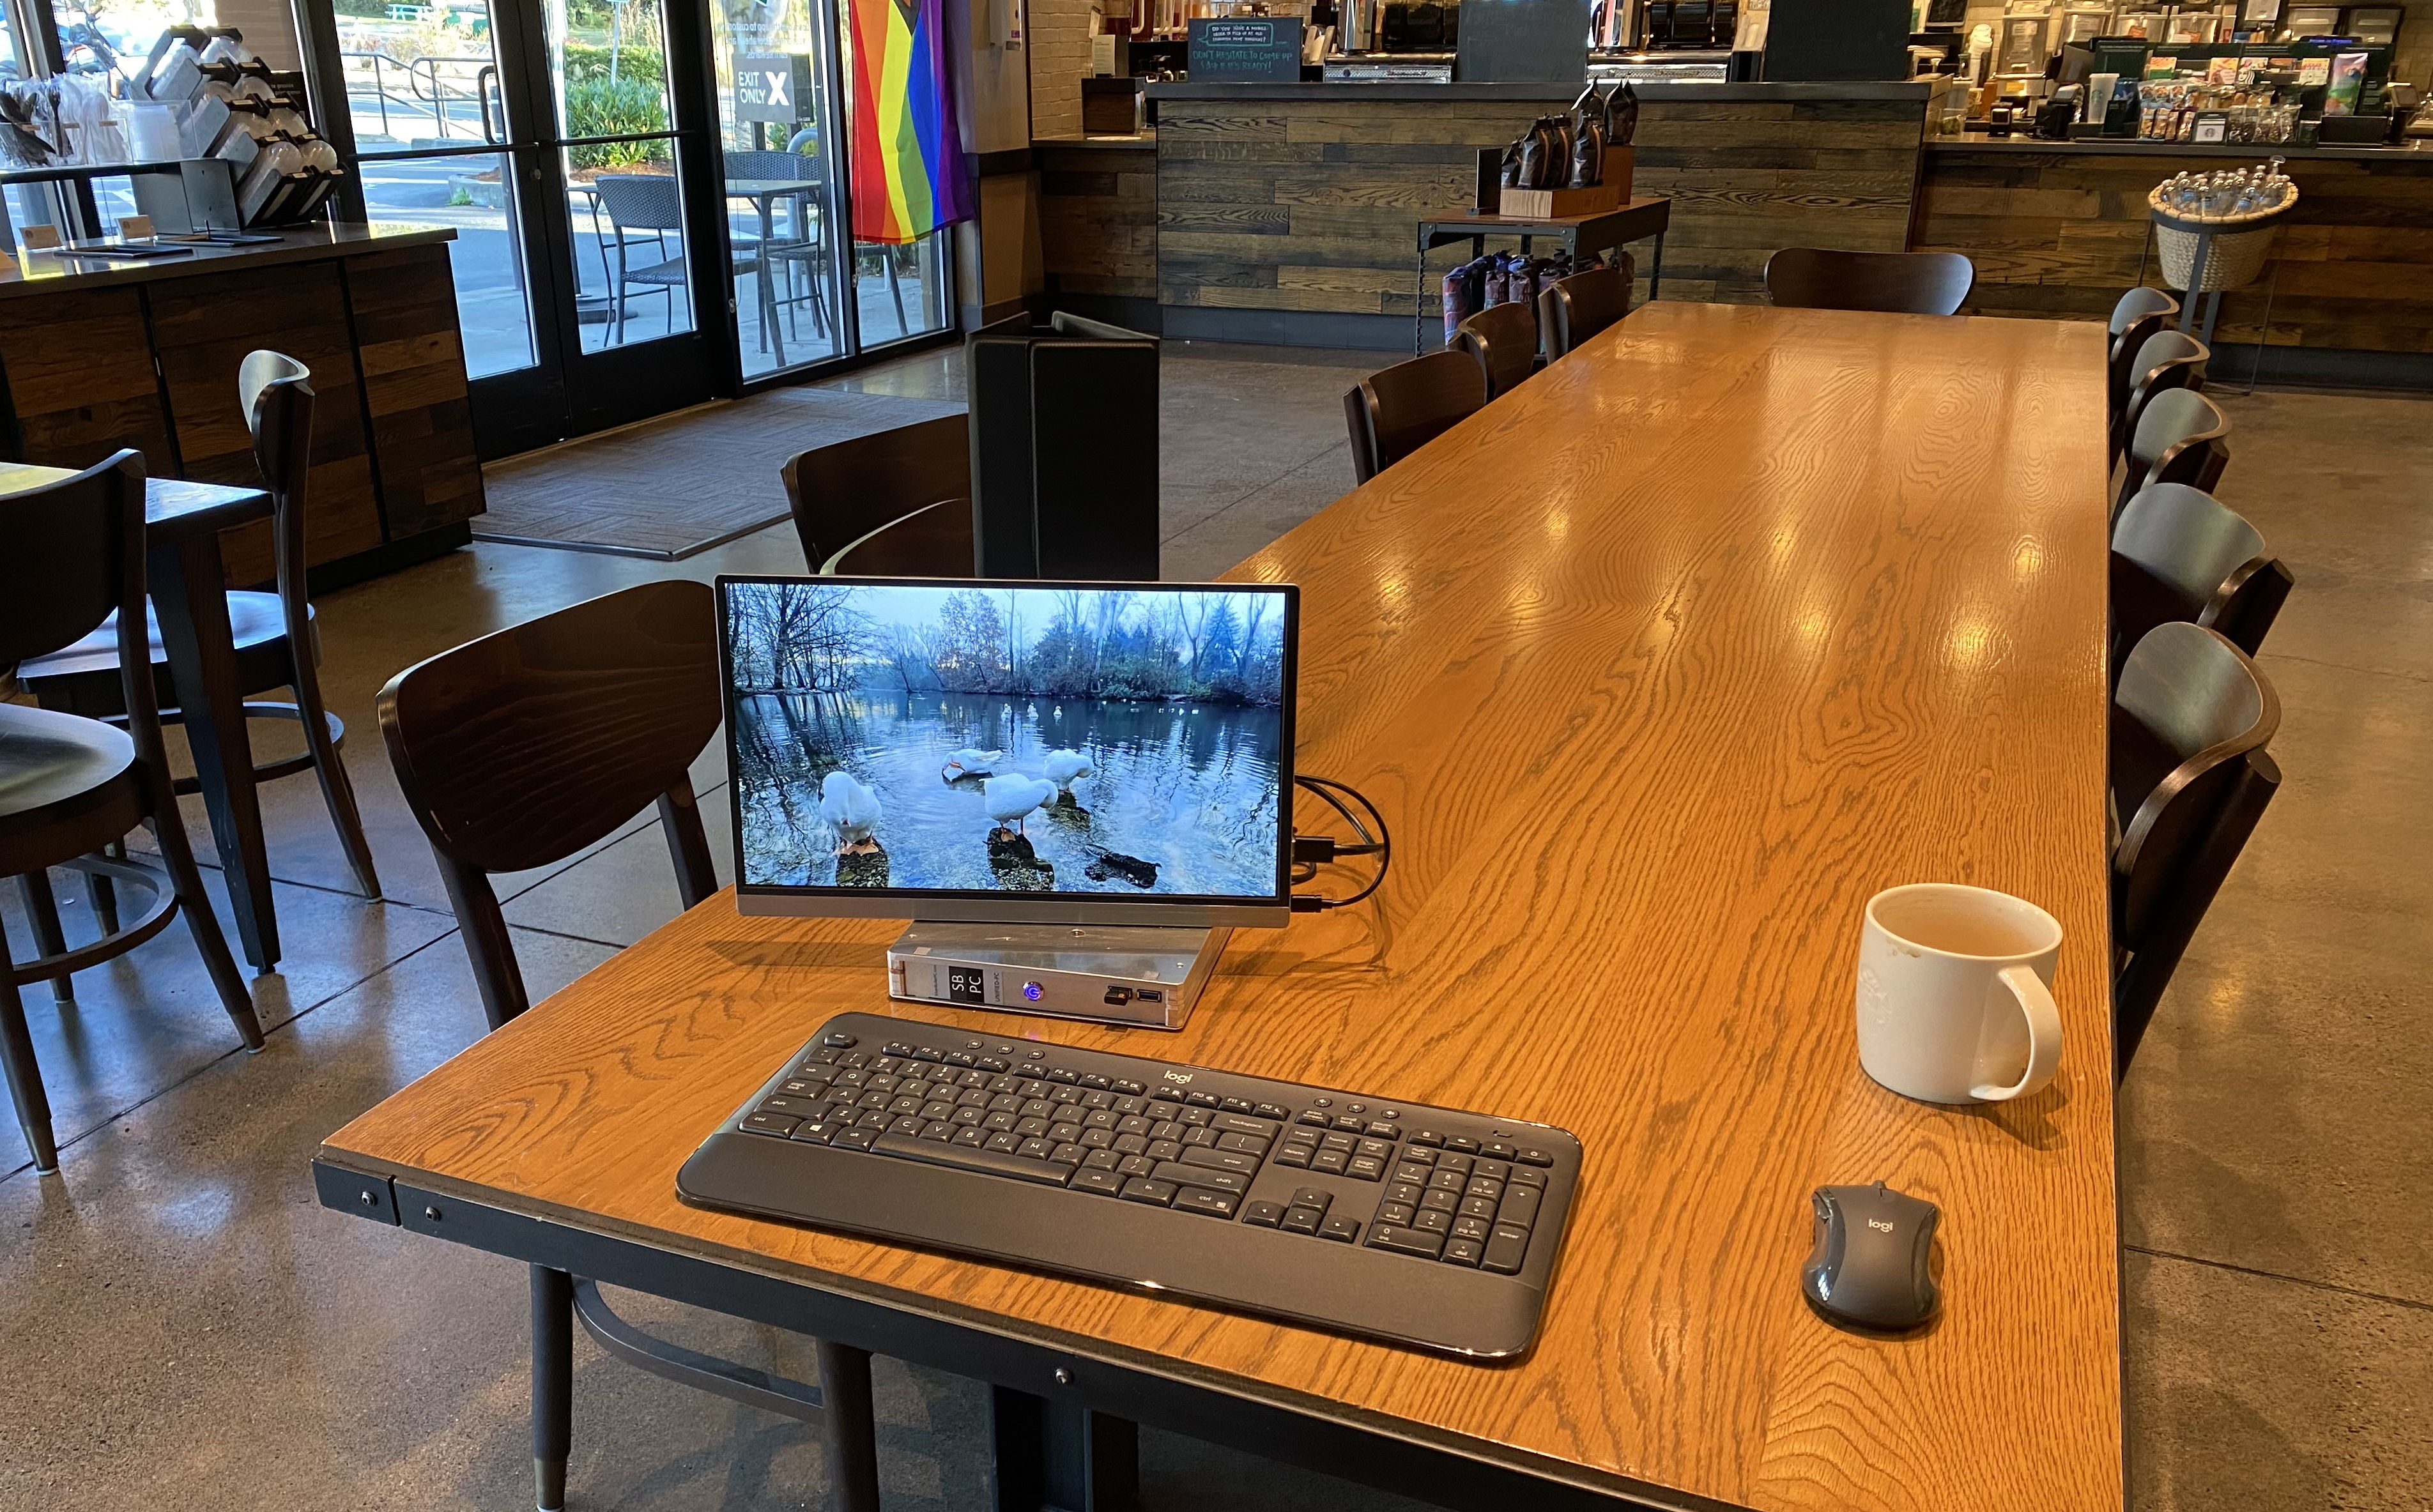 The Prototype at a Coffee Shop